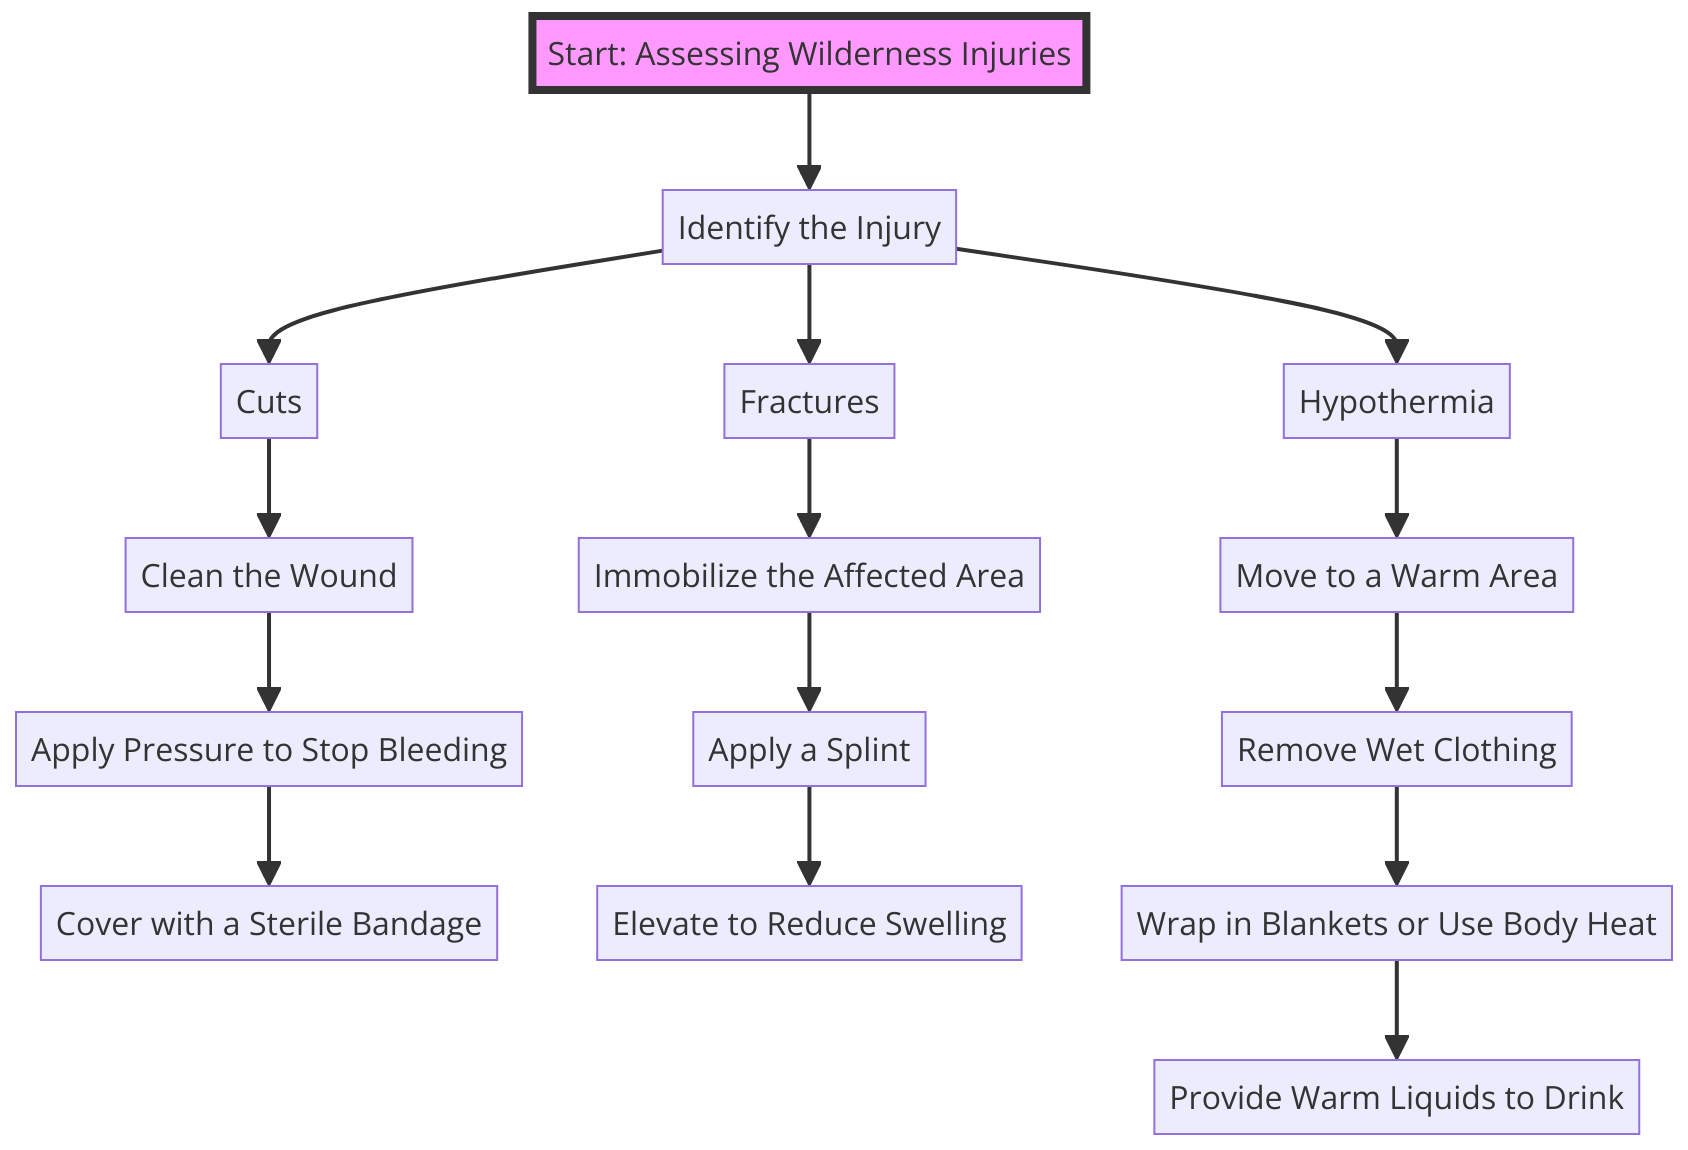  the assessment and response process for common wilderness injuries, such as cuts, fractures, and hypothermia